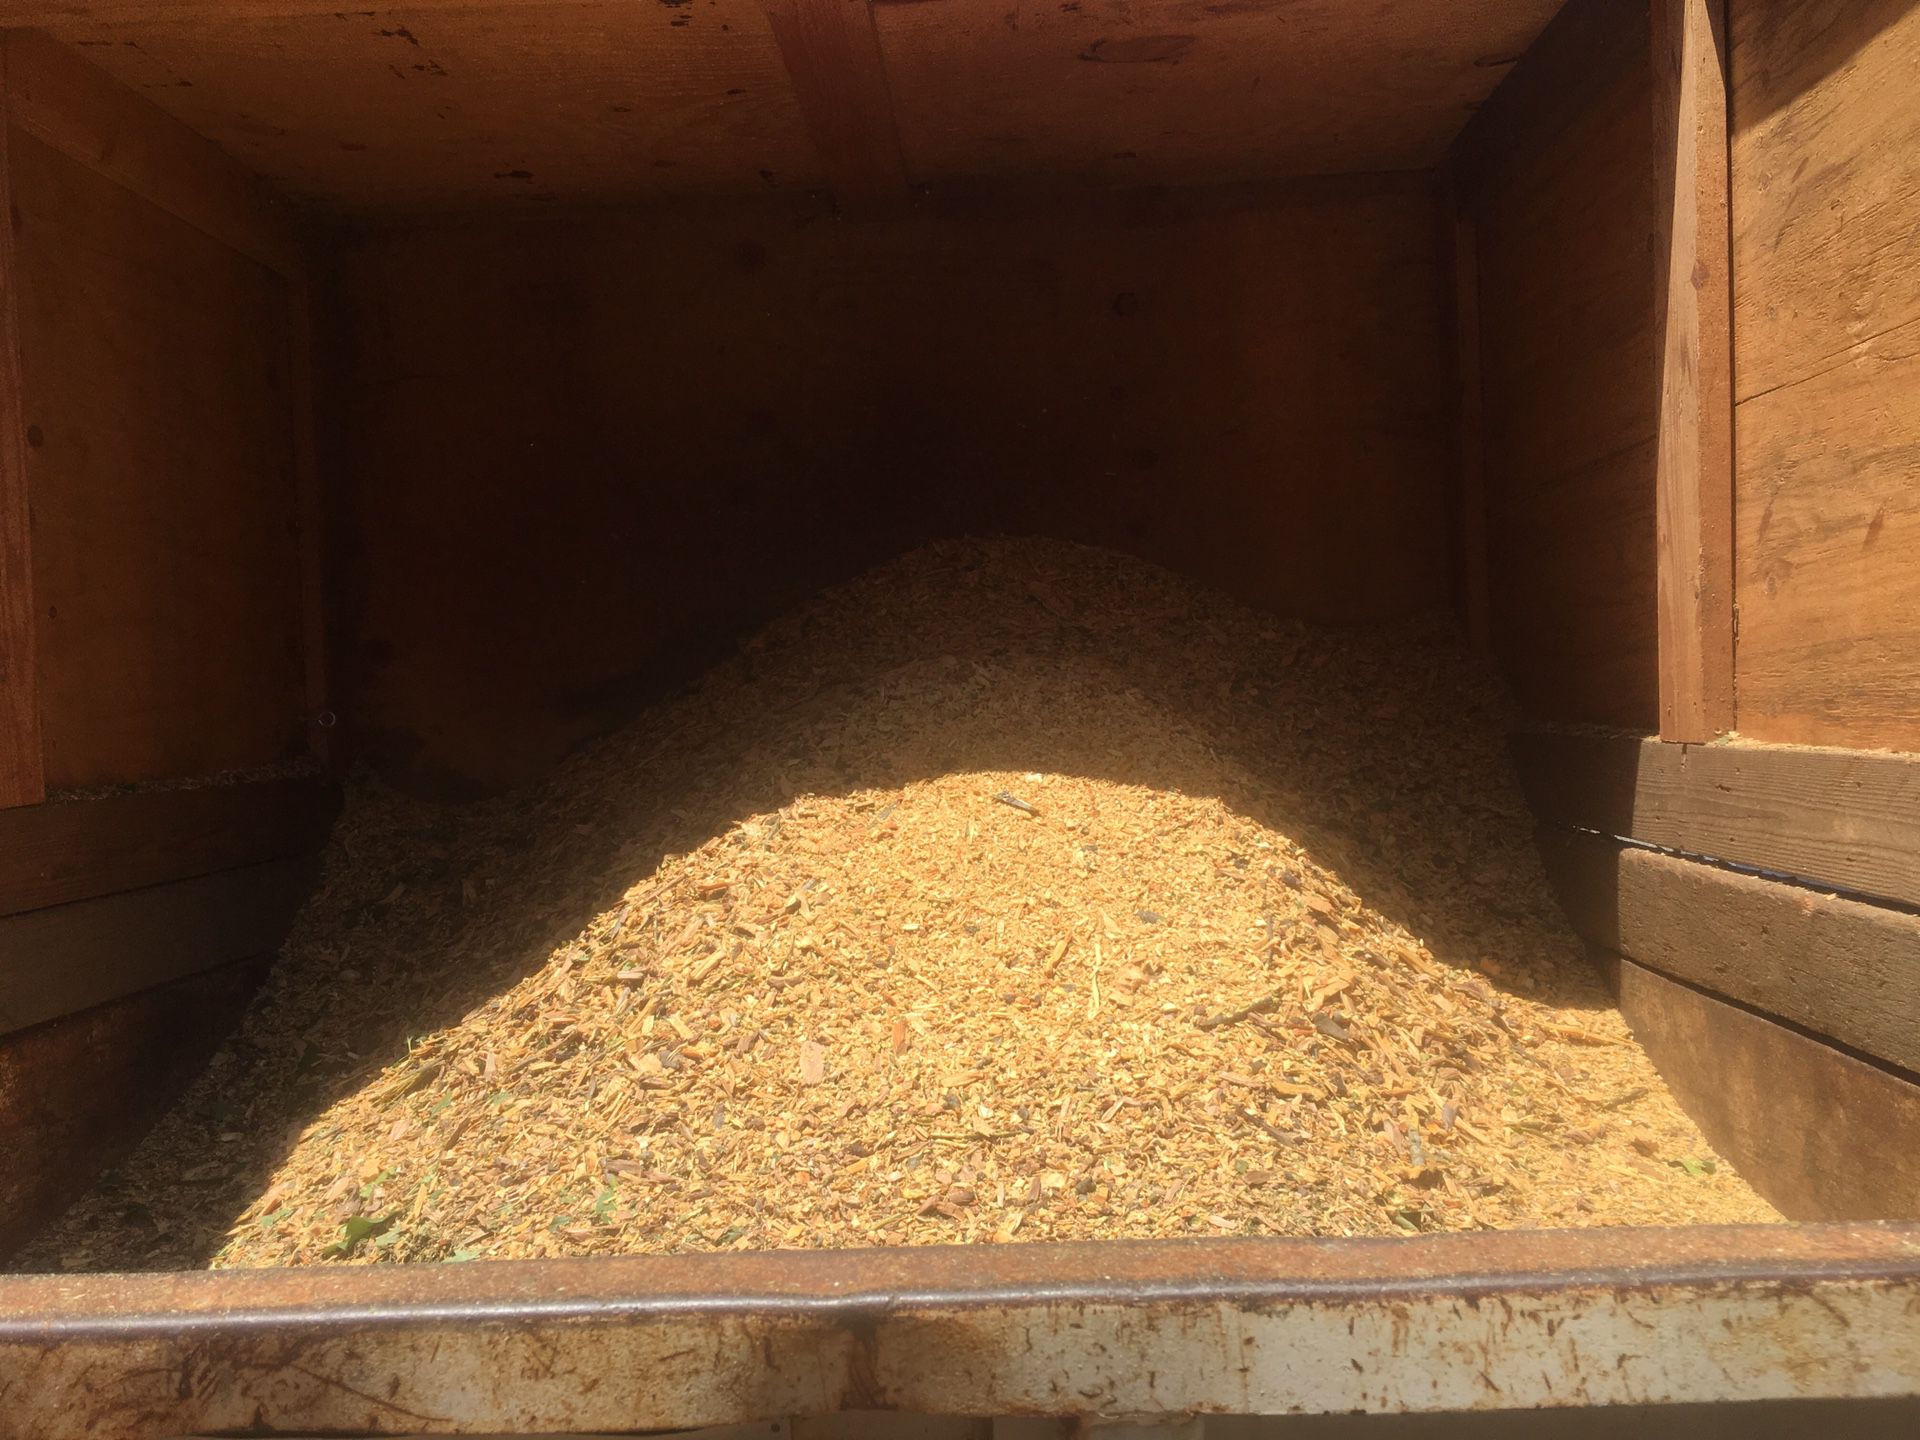 Free wood chips, free mulch, woodchips. Local delivery available today!